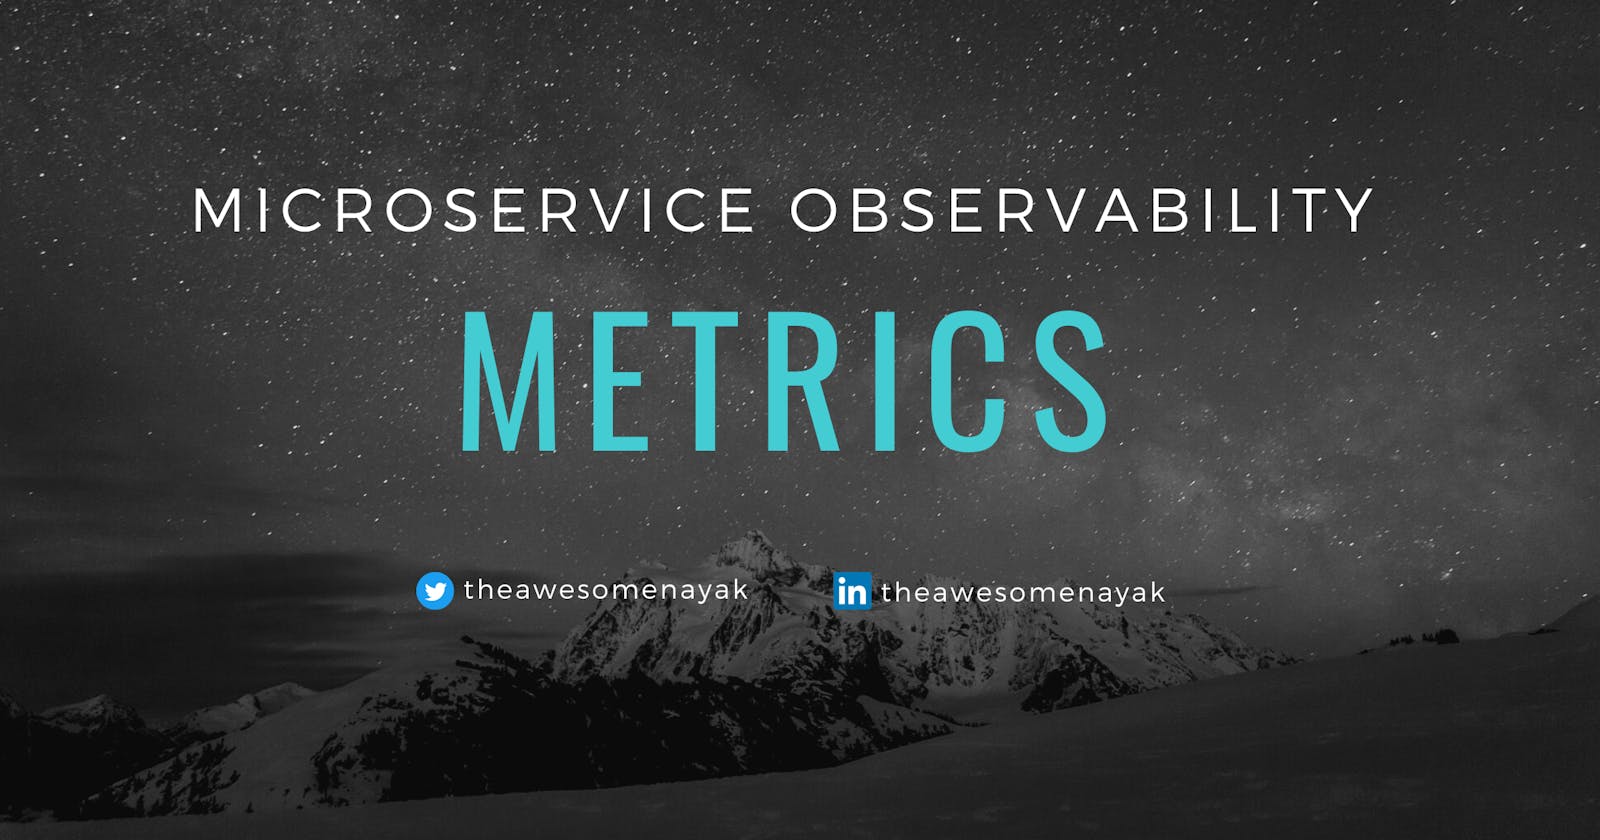 Microservice Observability - Monitoring